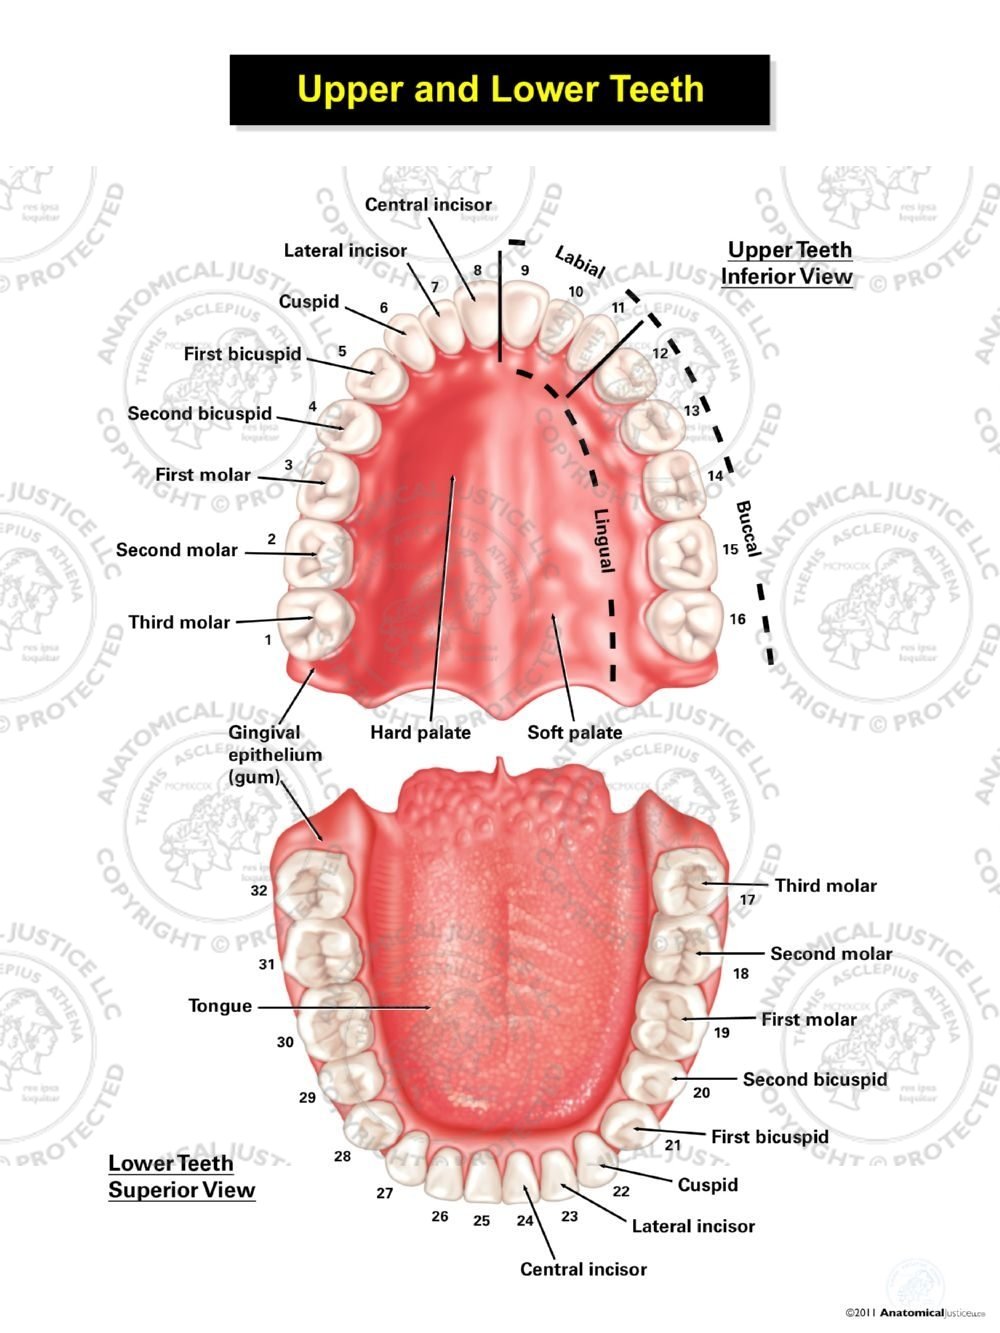 Upper and Lower Teeth